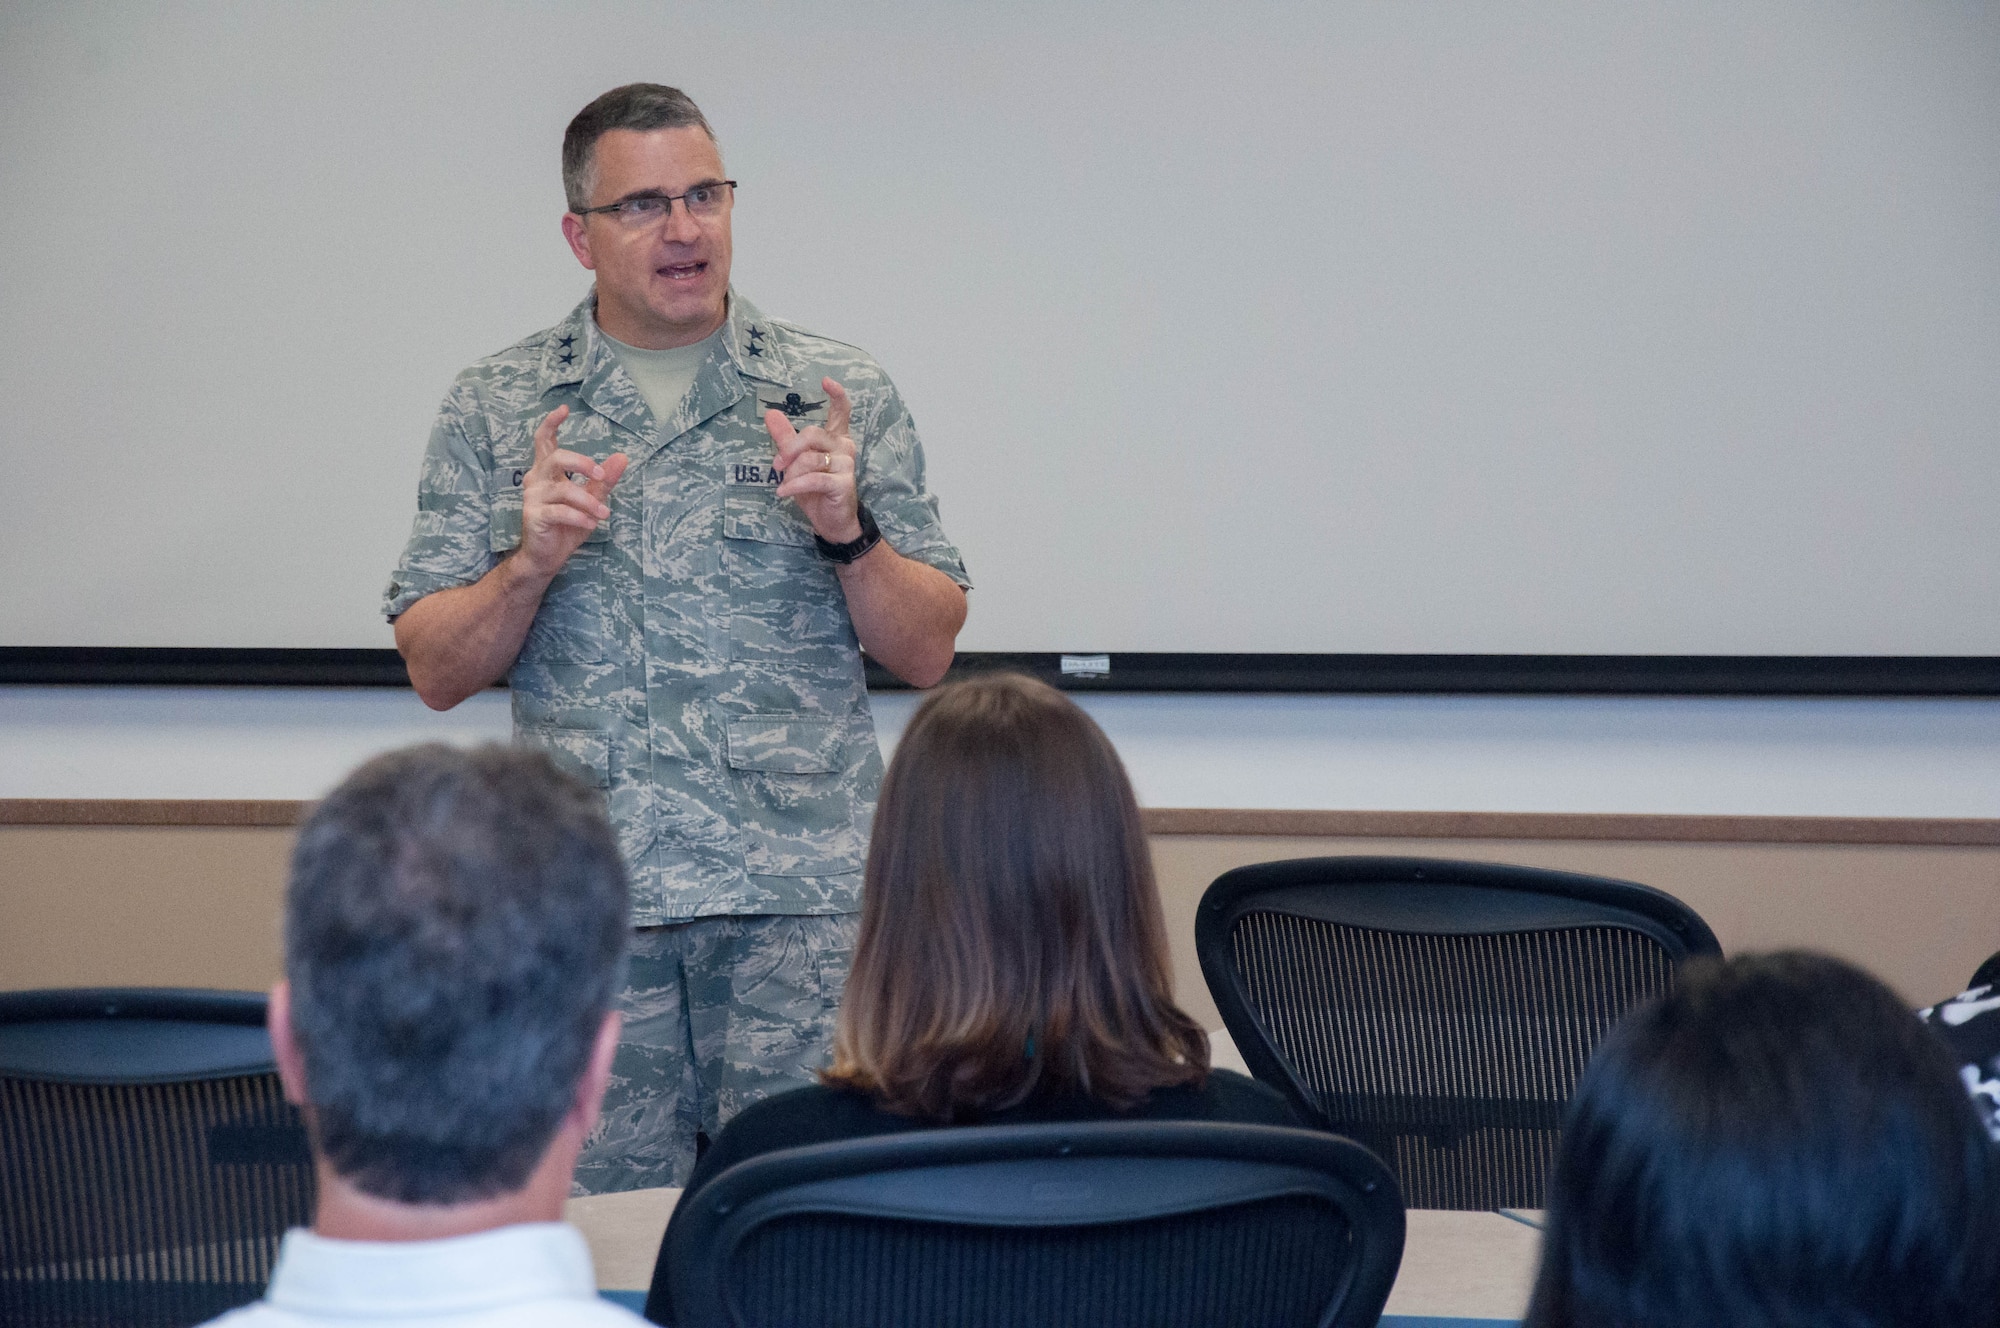 DAYTON, Ohio – Air Force Research Laboratory Commander Maj. Gen. William T. Cooley delivers opening remarks at the AFRL Commander’s Challenge 2017 kick off Aug. 2 at the Wright Brothers Institute Tec^Edge Innovation and Collaboration Center here. This year’s challenge is “Precision Remote Resupply,” designed to support combat troops deployed from a forward operating base. (U.S. Air Force photo/John Harrington)